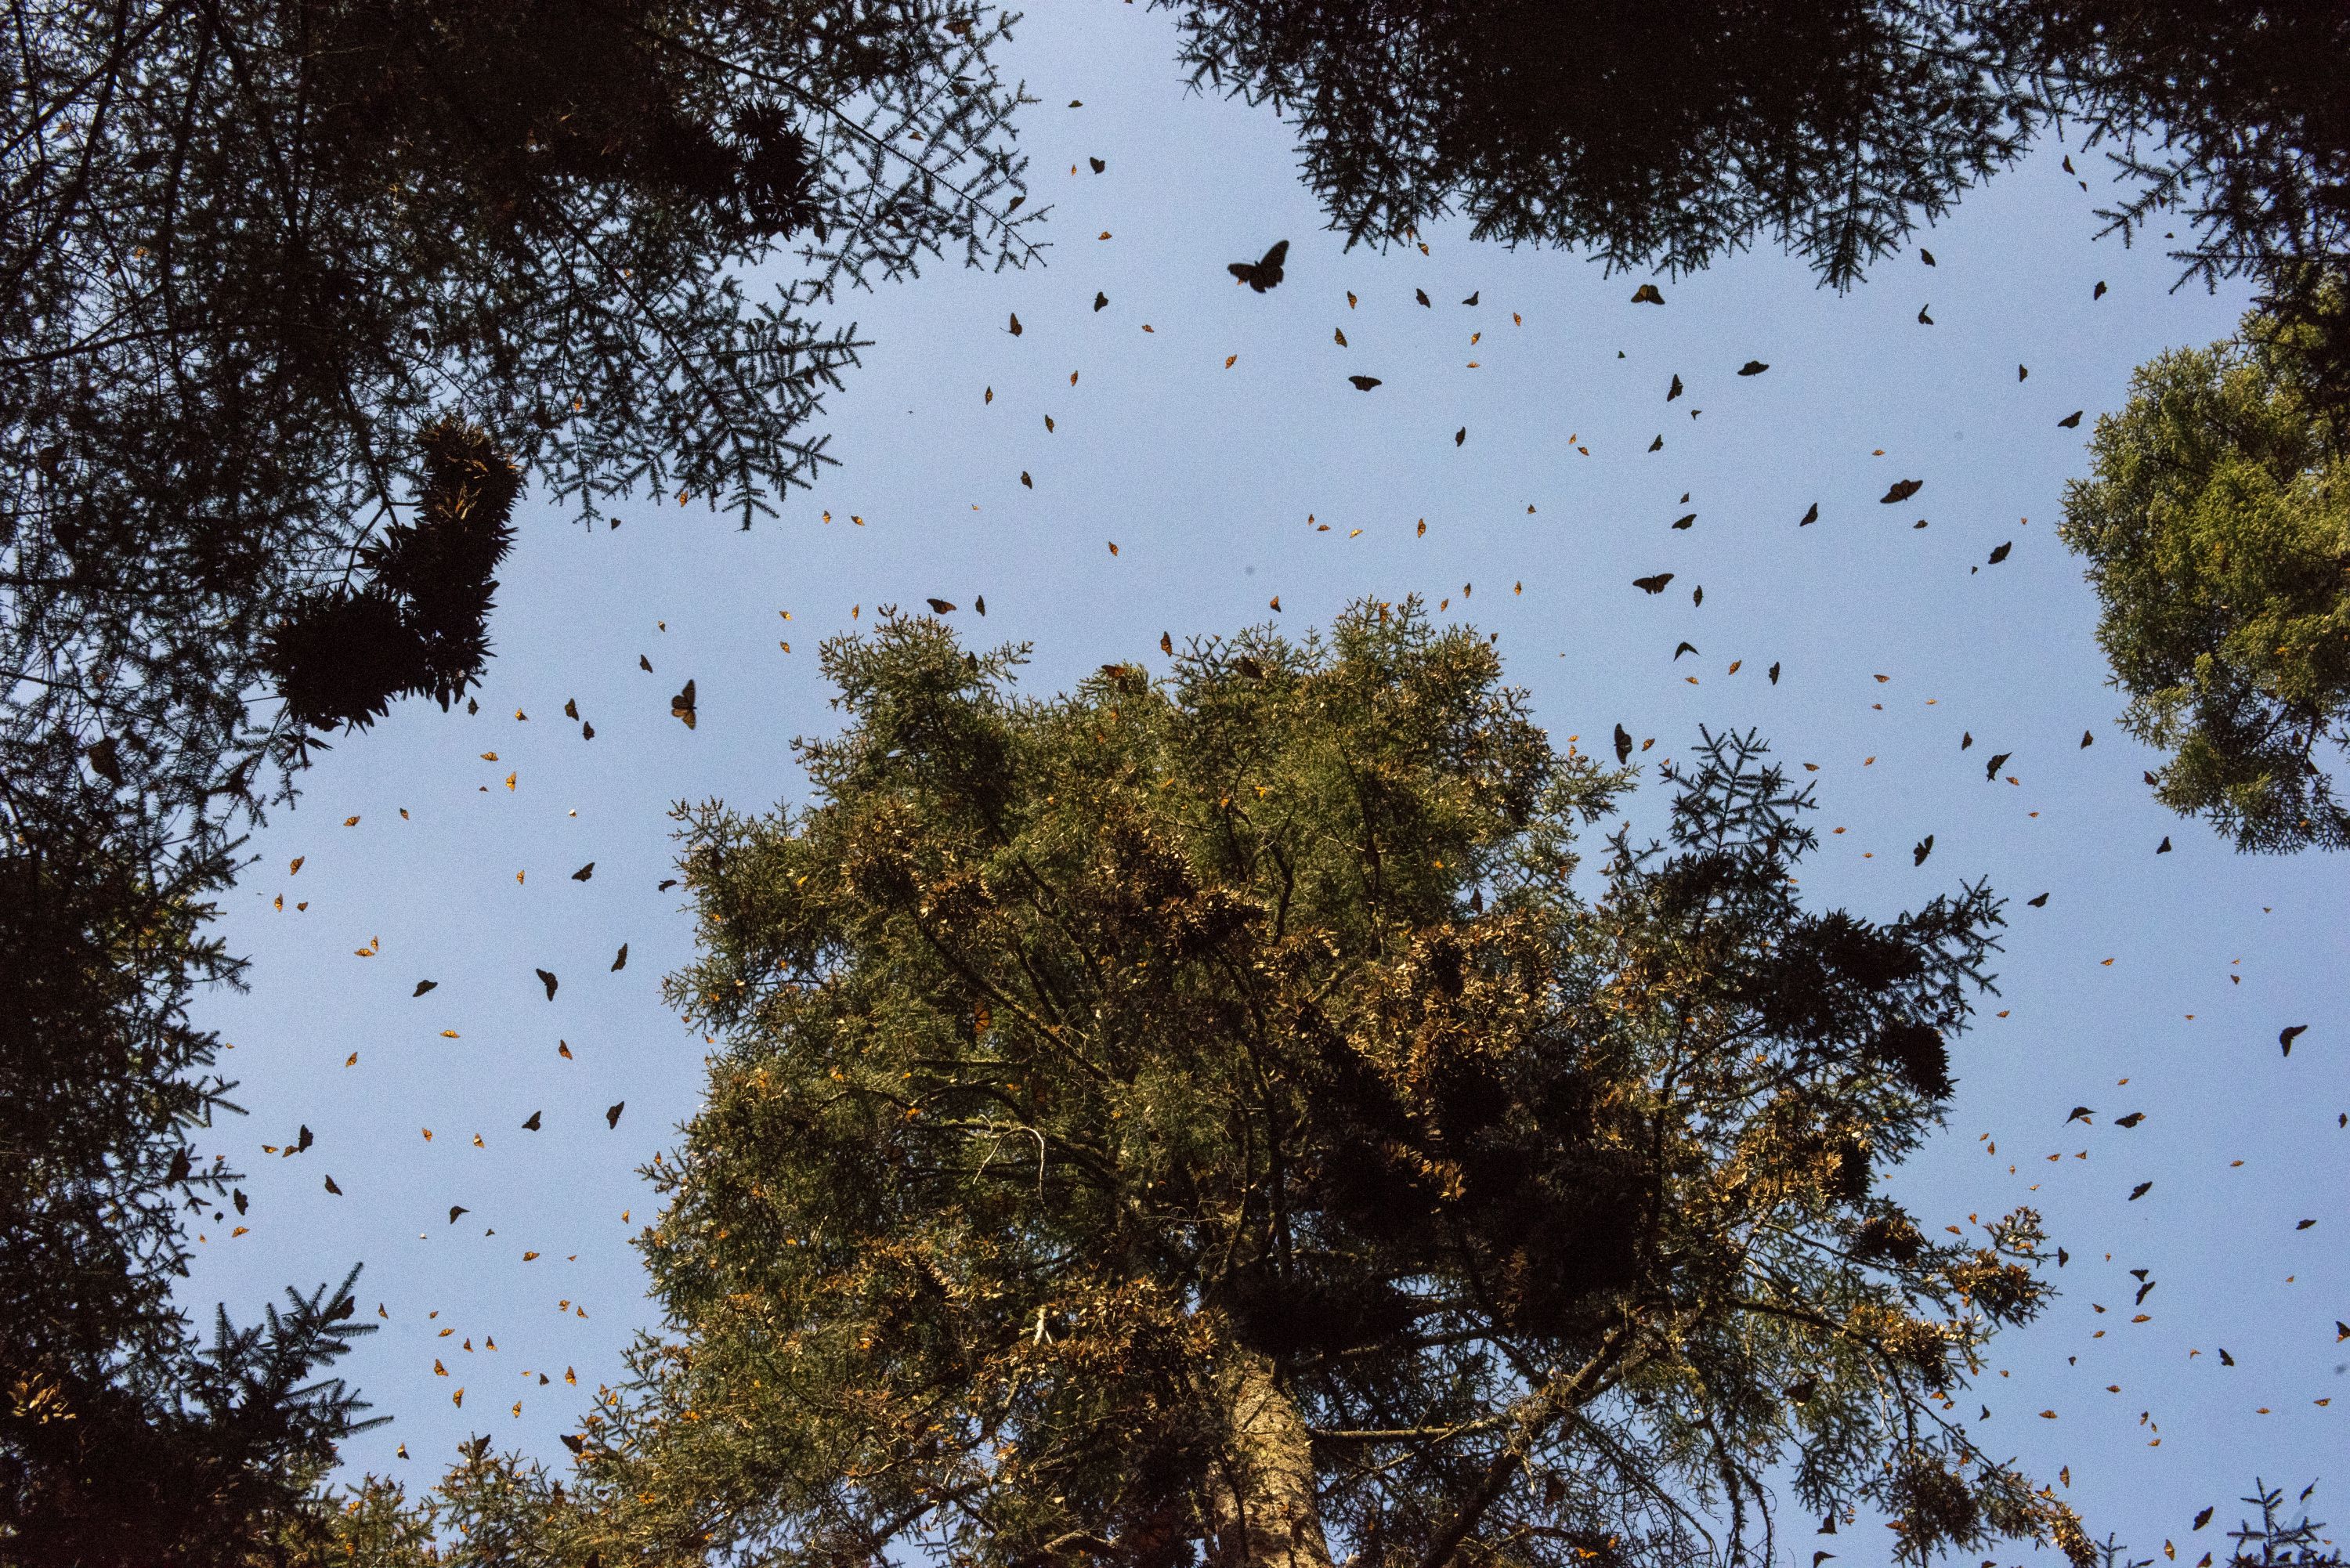 Mexico's monarch butterfly migration